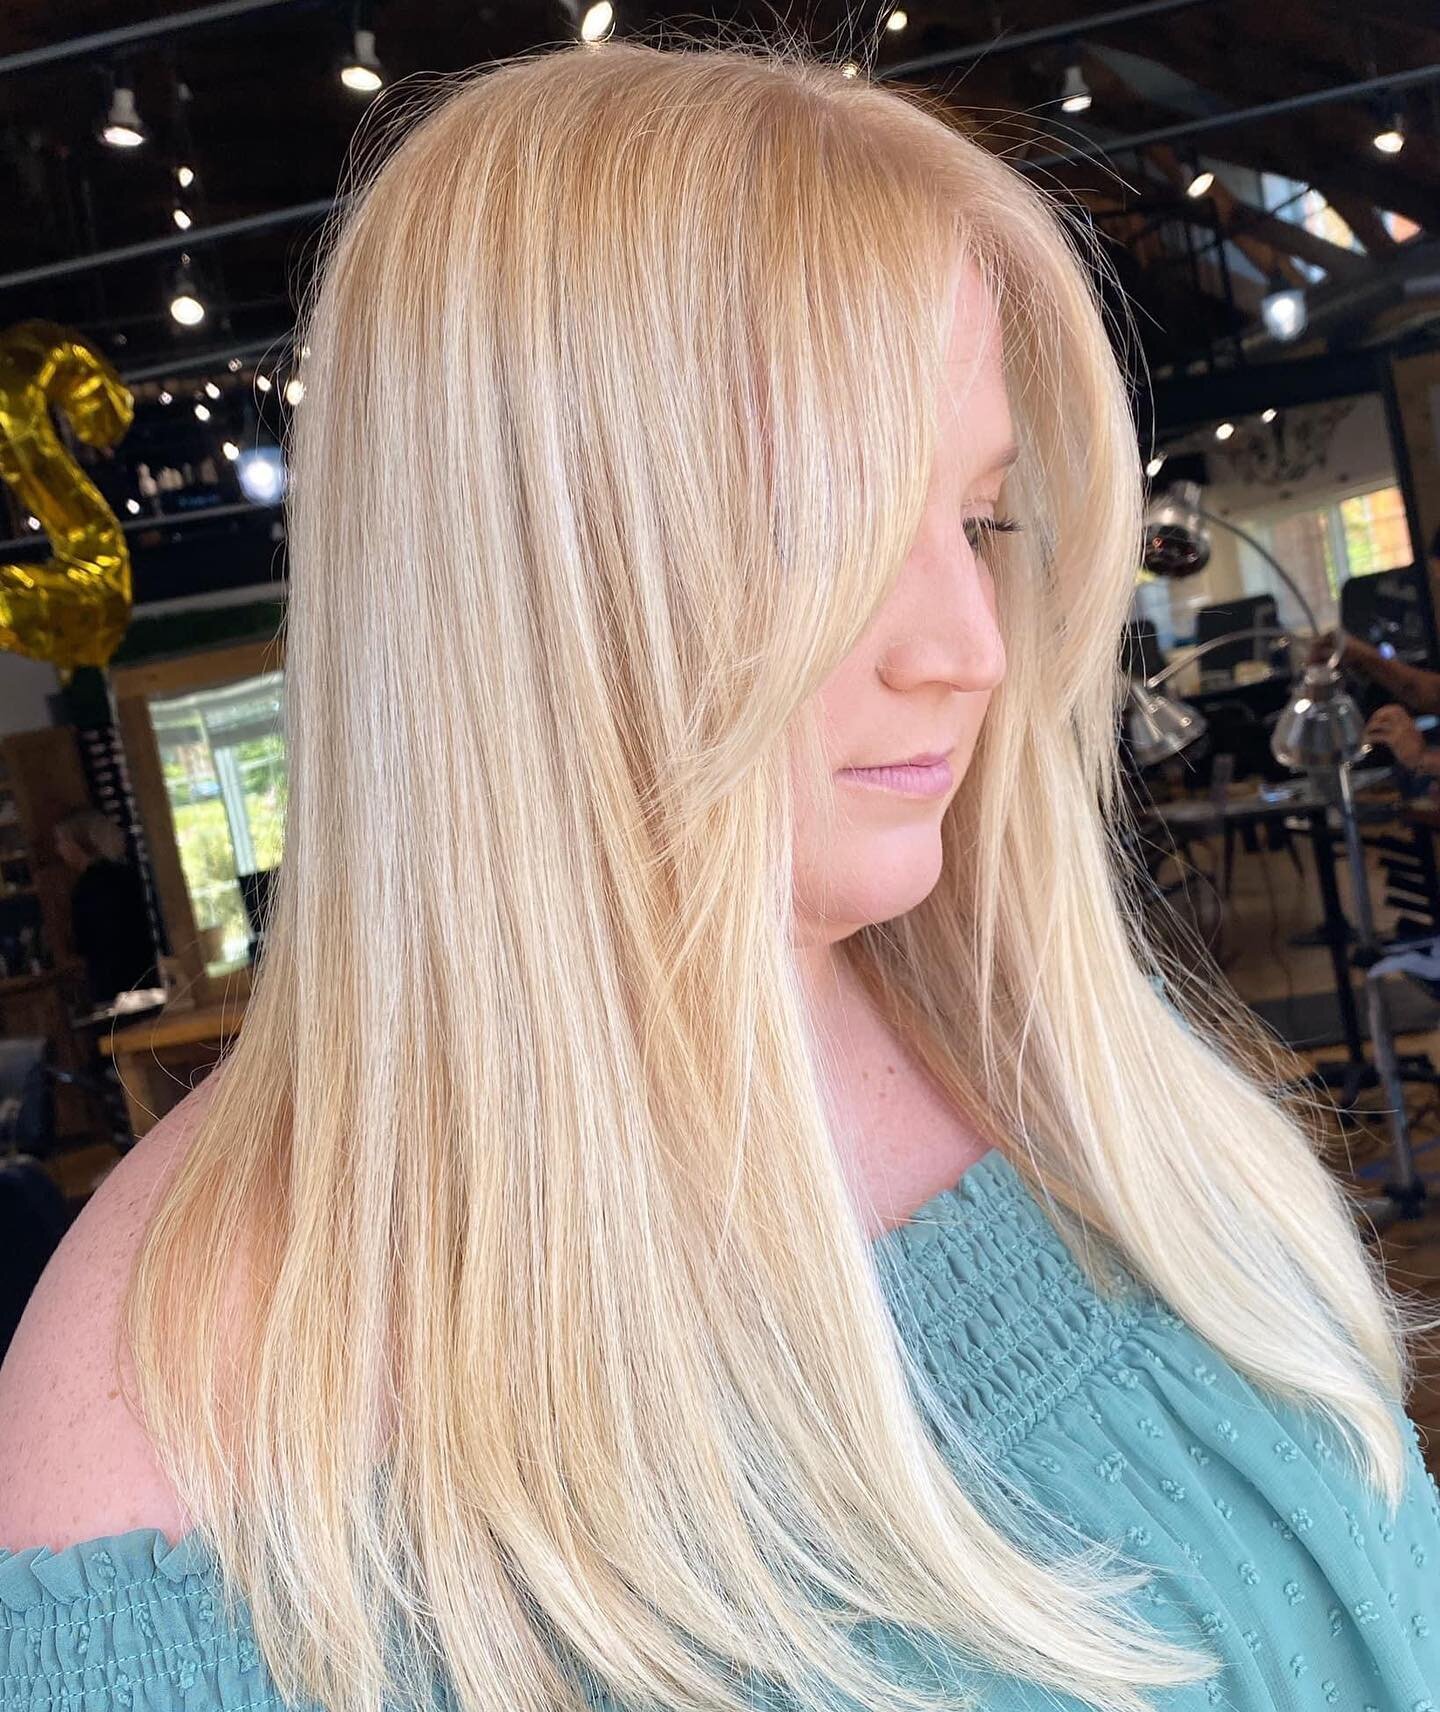 ❤️&zwj;🔥❤️&zwj;🔥❤️&zwj;🔥❤️&zwj;🔥❤️&zwj;🔥
&bull;
&bull;

#stlhairstylist #stlhair #stlhairsalon #stlstylist #stlextensions #stlblondingspecialist #stlreels #hairreels #haireducation #hairstylistreels #hairstylist #behindthechair #hairtips #hairtr